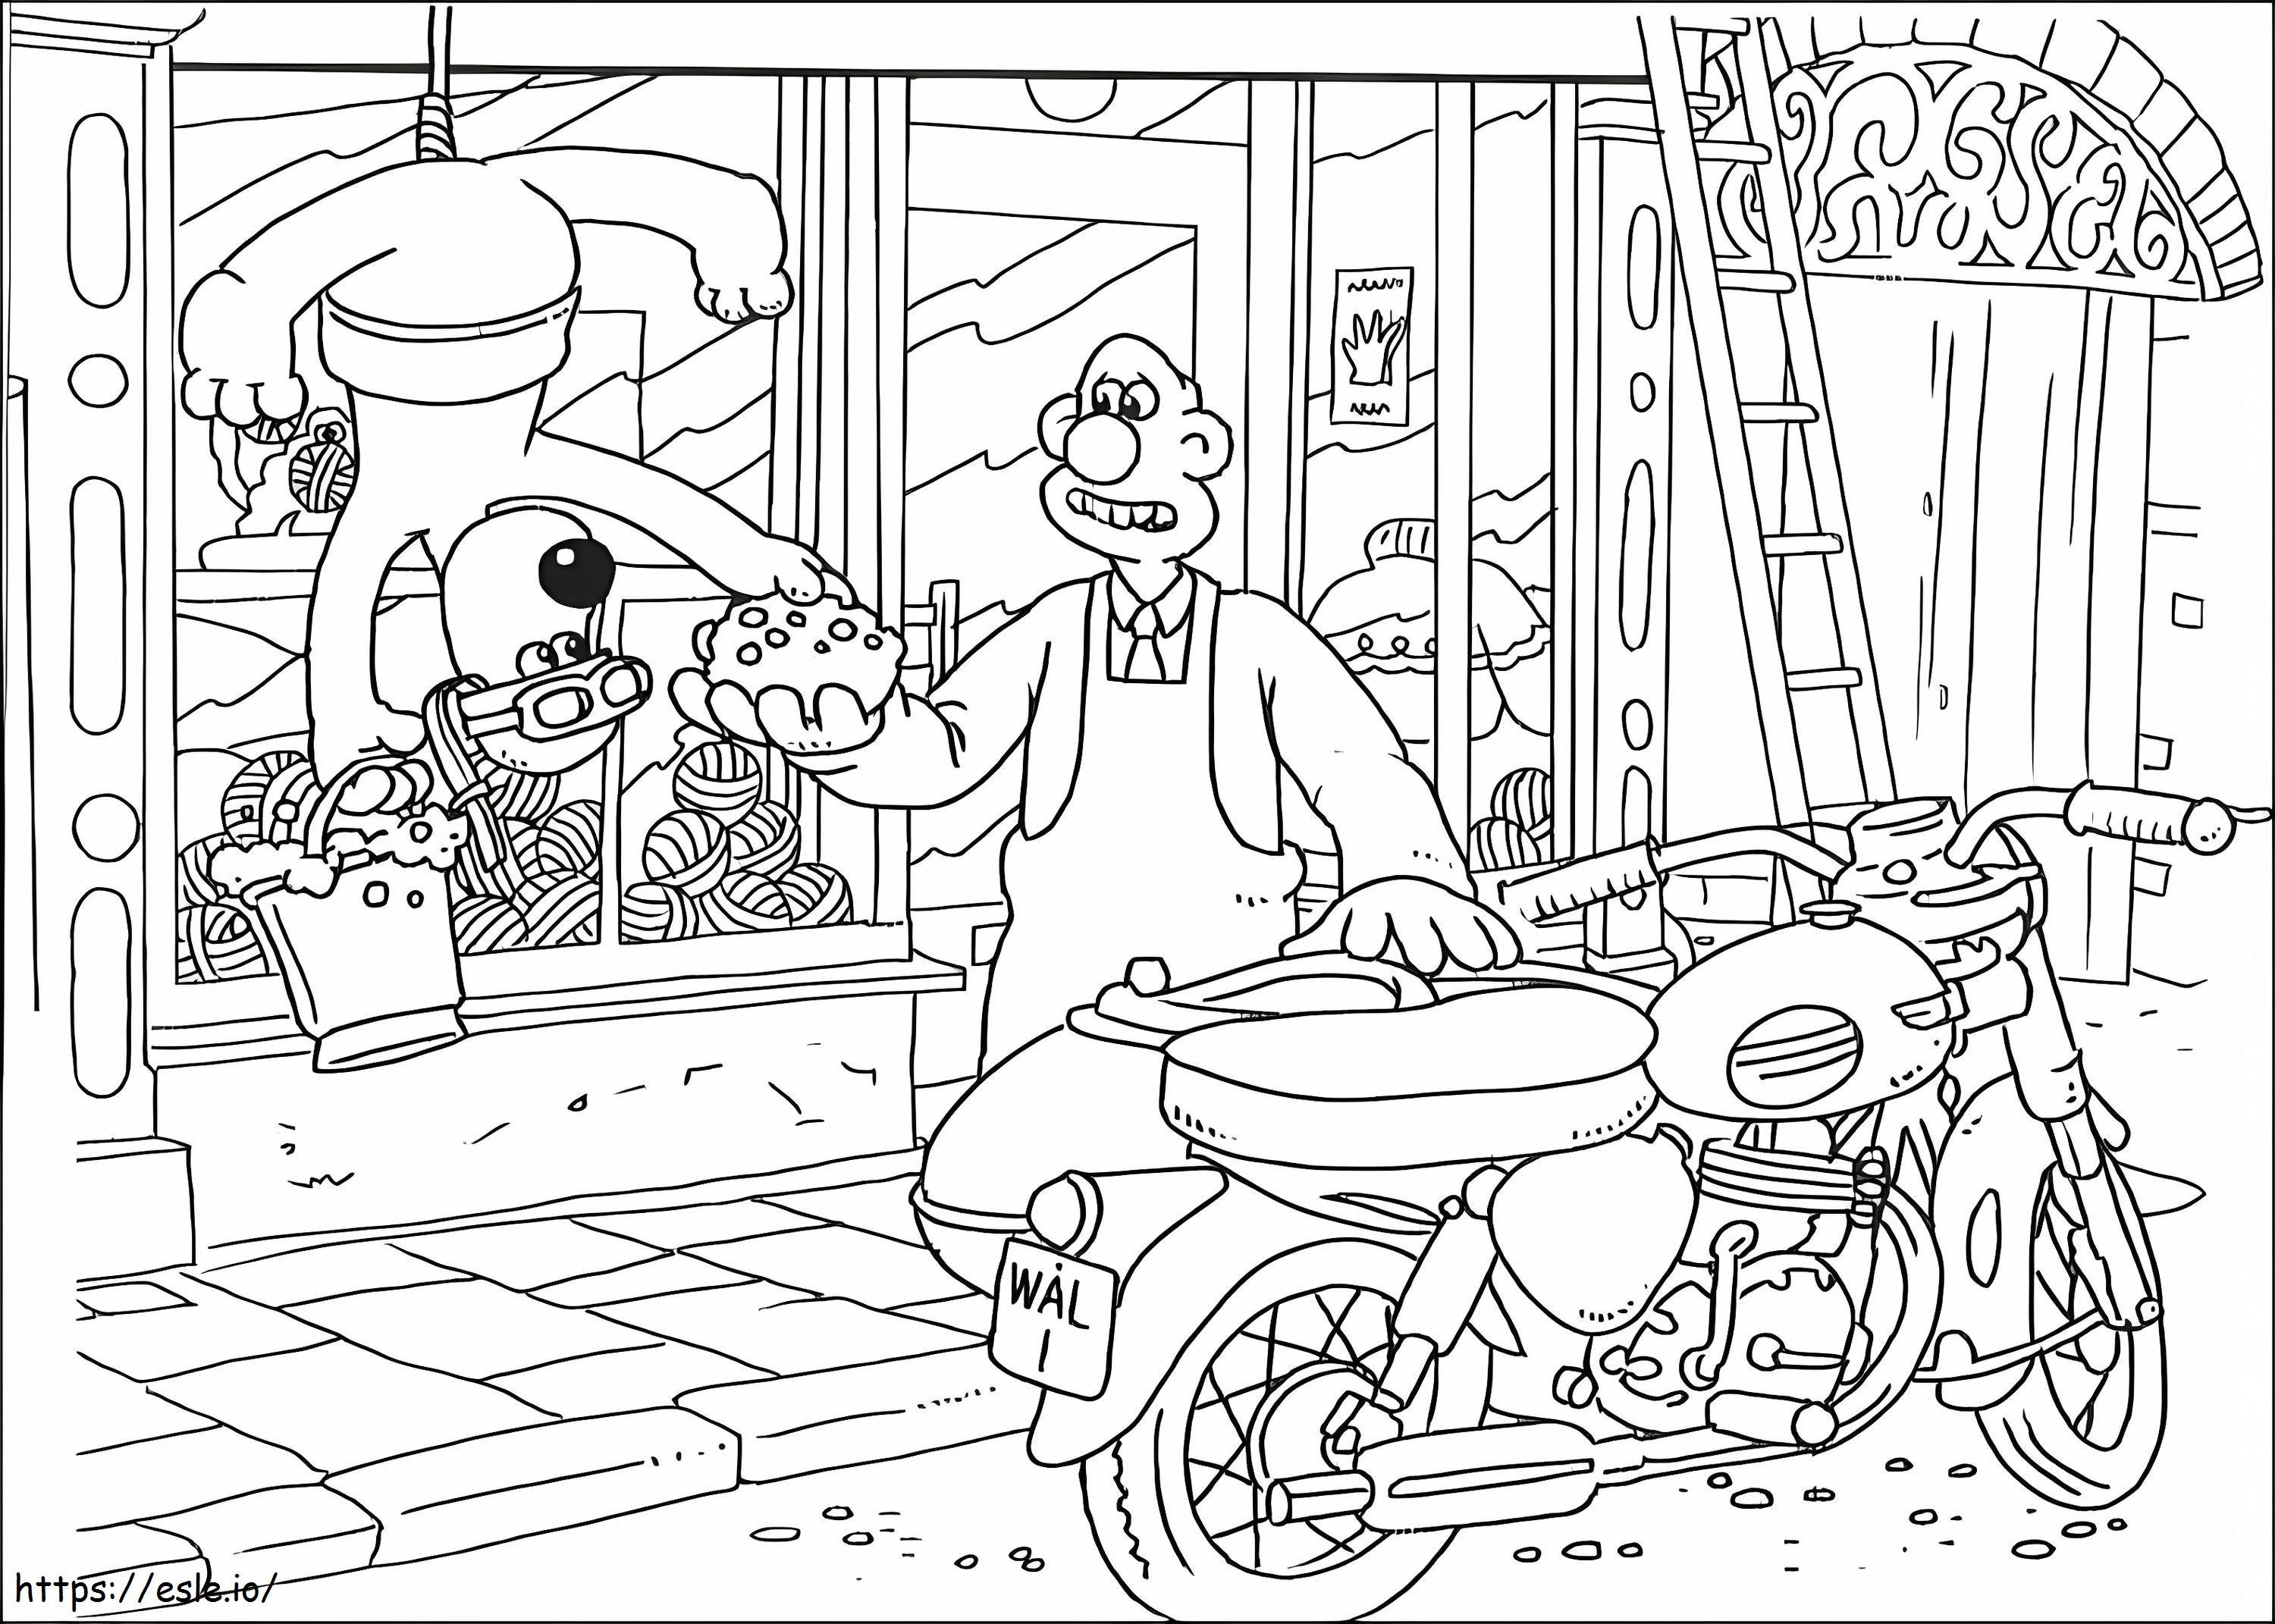 Wallace And Gromit Working coloring page